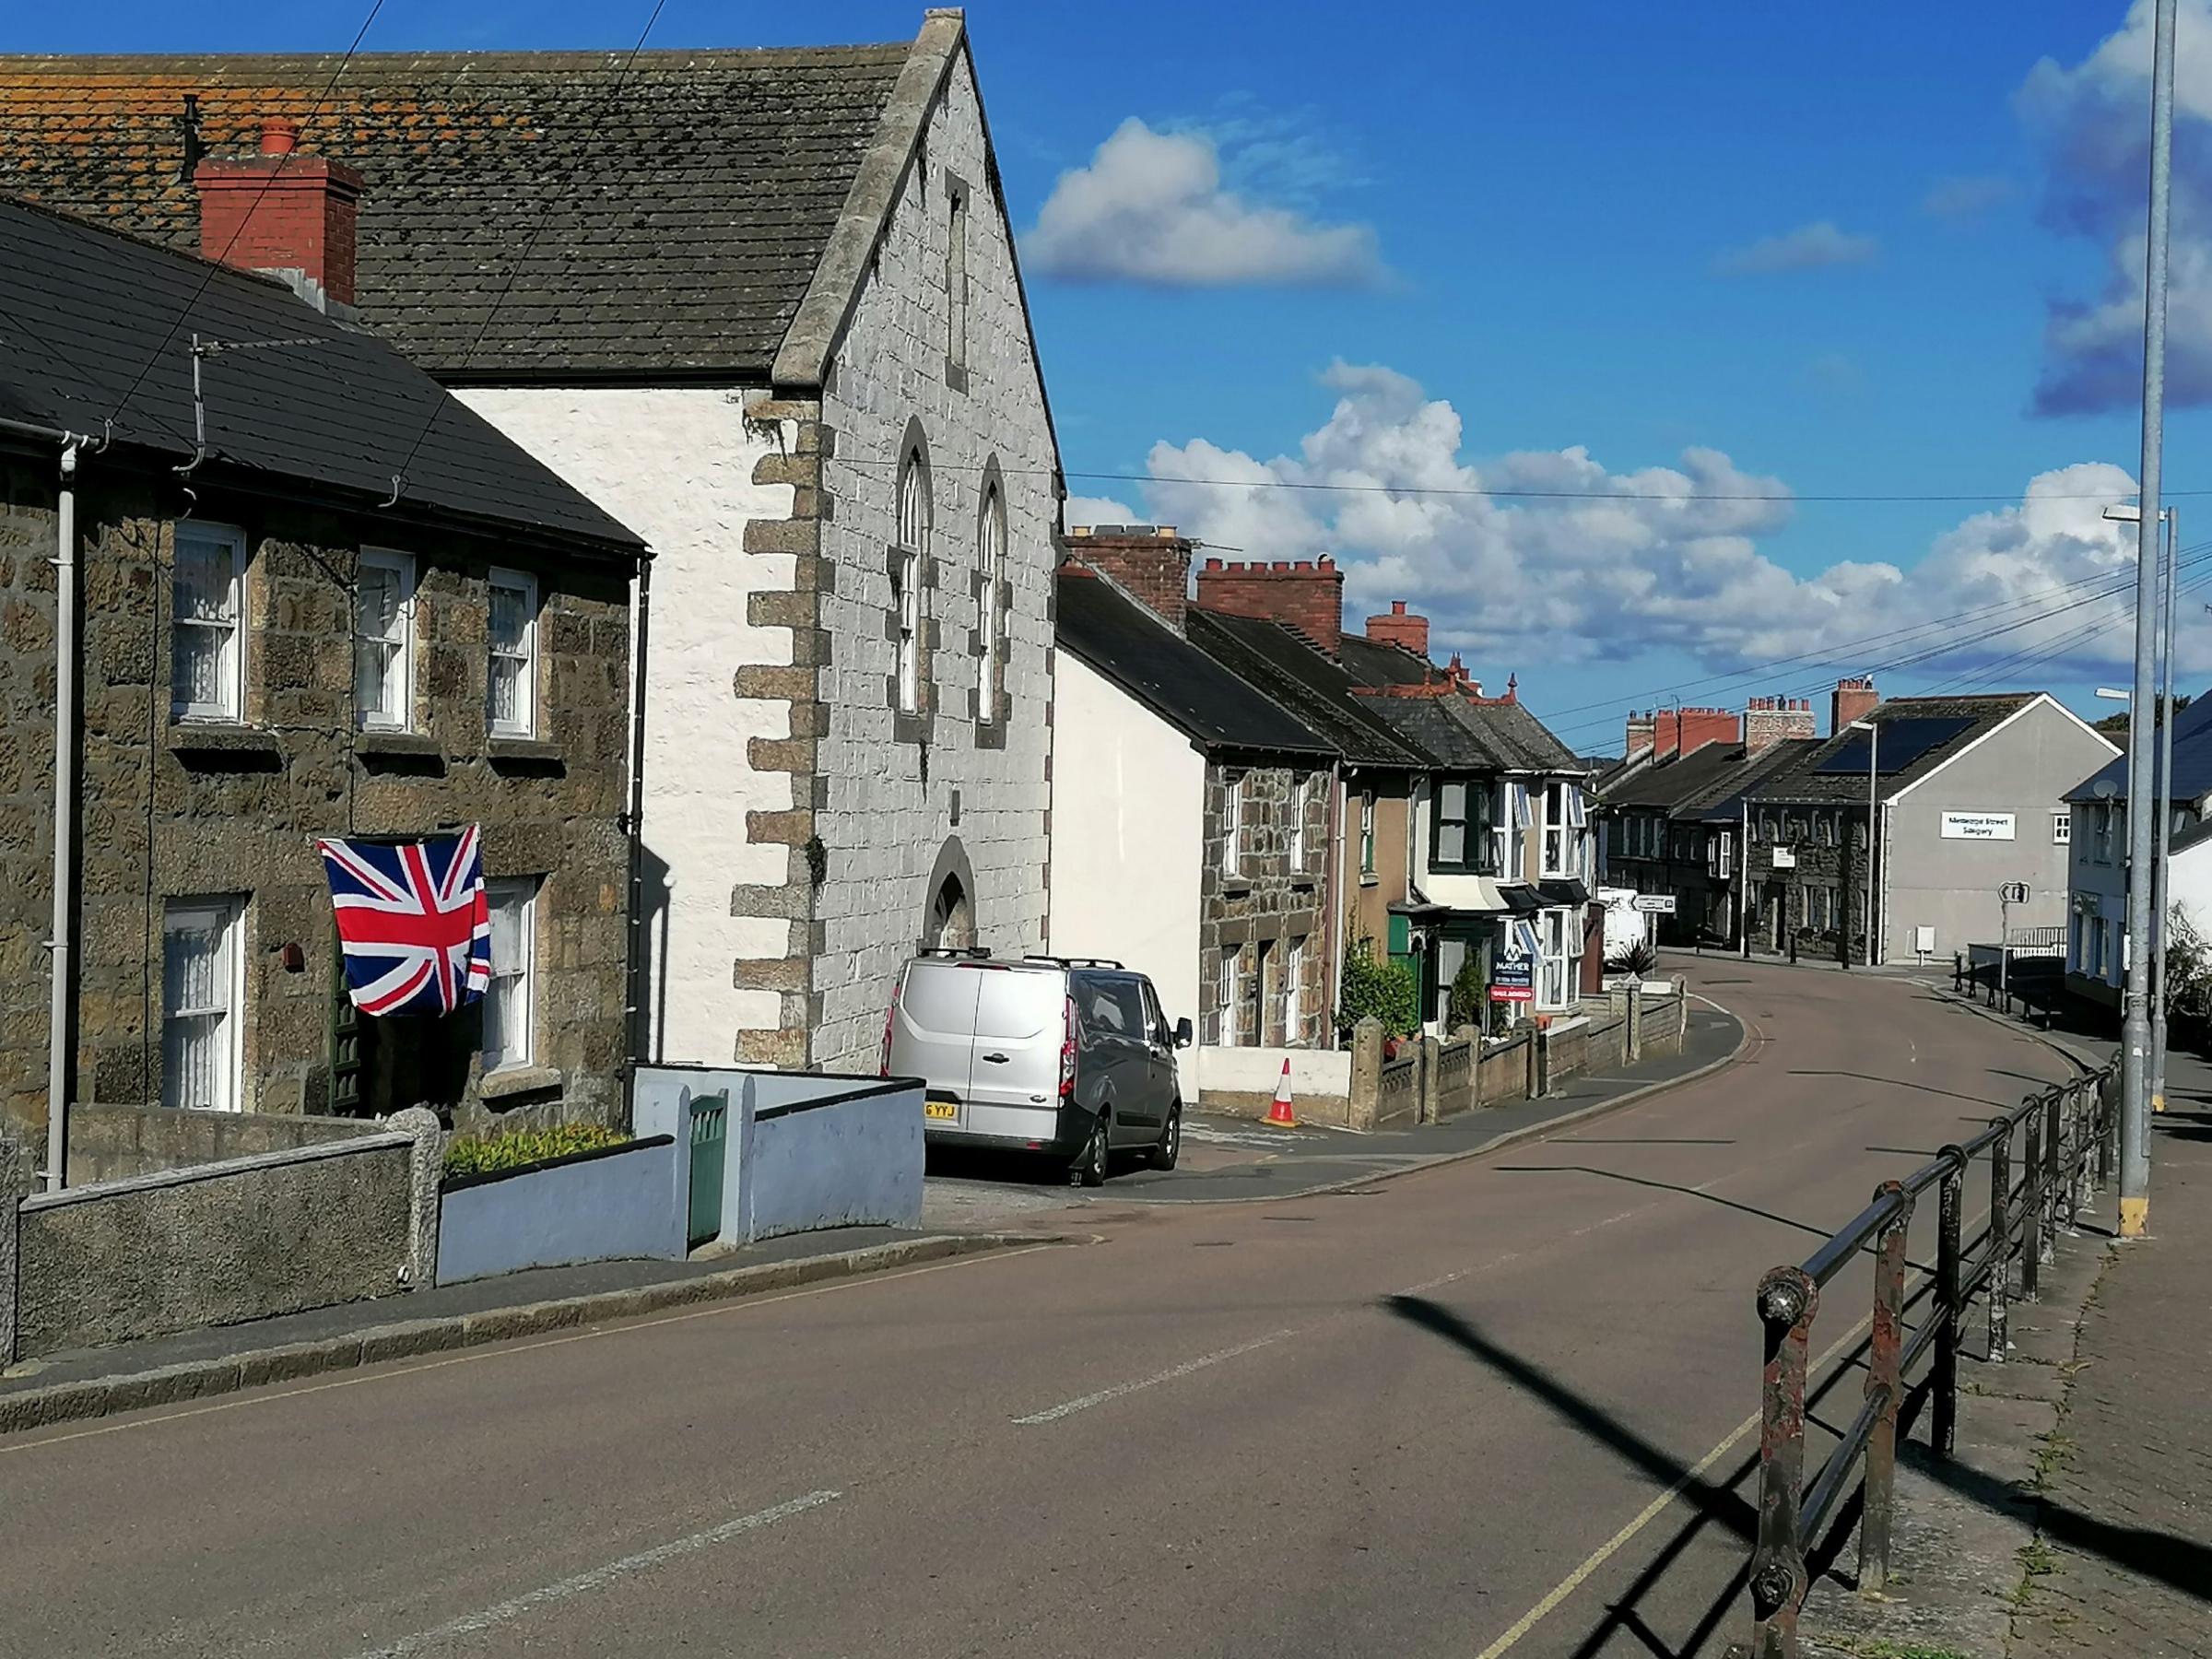 Meneage Street in Helston was empty at 10.30am, with one house displaying the Union Flag